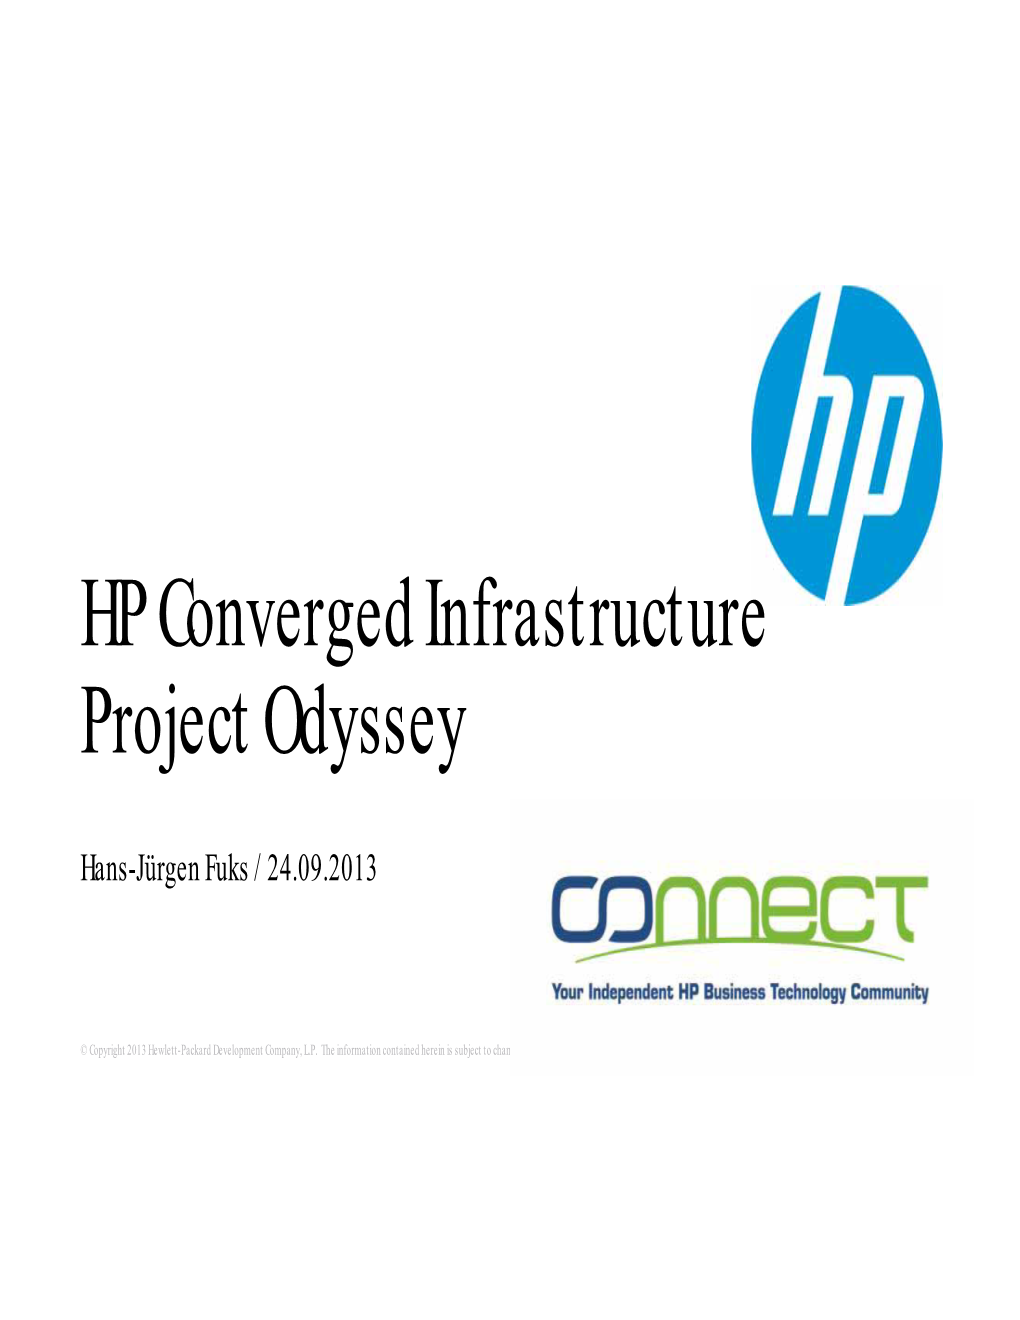 HP Converged Infrastructure Project Odyssey